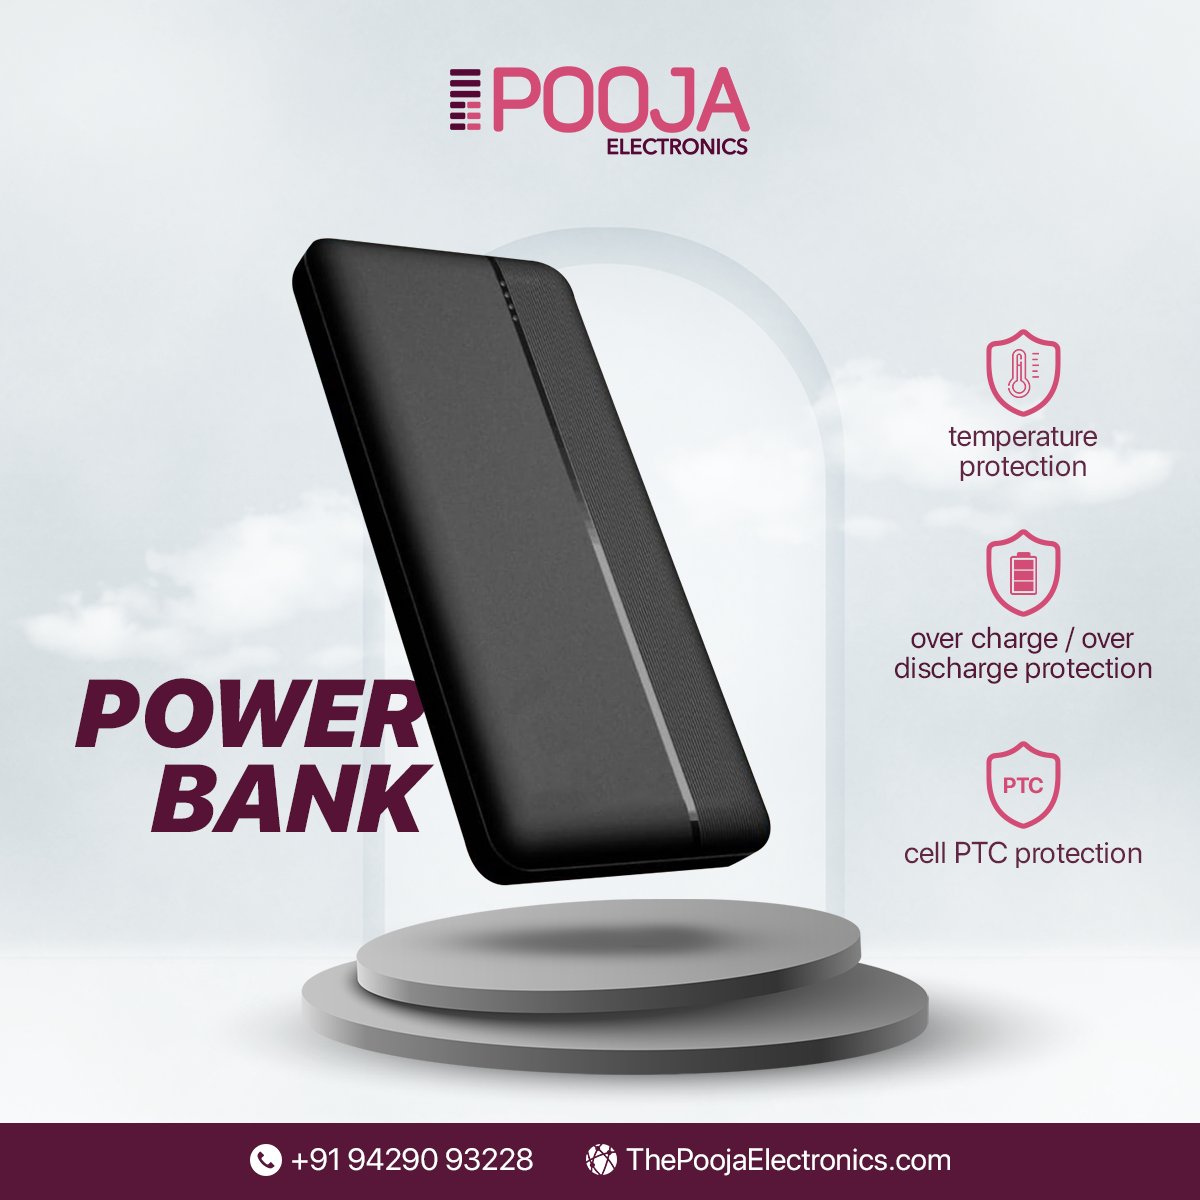 Never run out of power again! Our reliable power bank keeps your devices charged on the go.⚡🔋
.
#PoojaElectronics #PowerBank #PortablePower #StayCharged #OnTheGo #MobilePower #BatteryBackup #TechEssentials #PowerOnDemand #ChargingSolution #StayConnected #HighCapacity